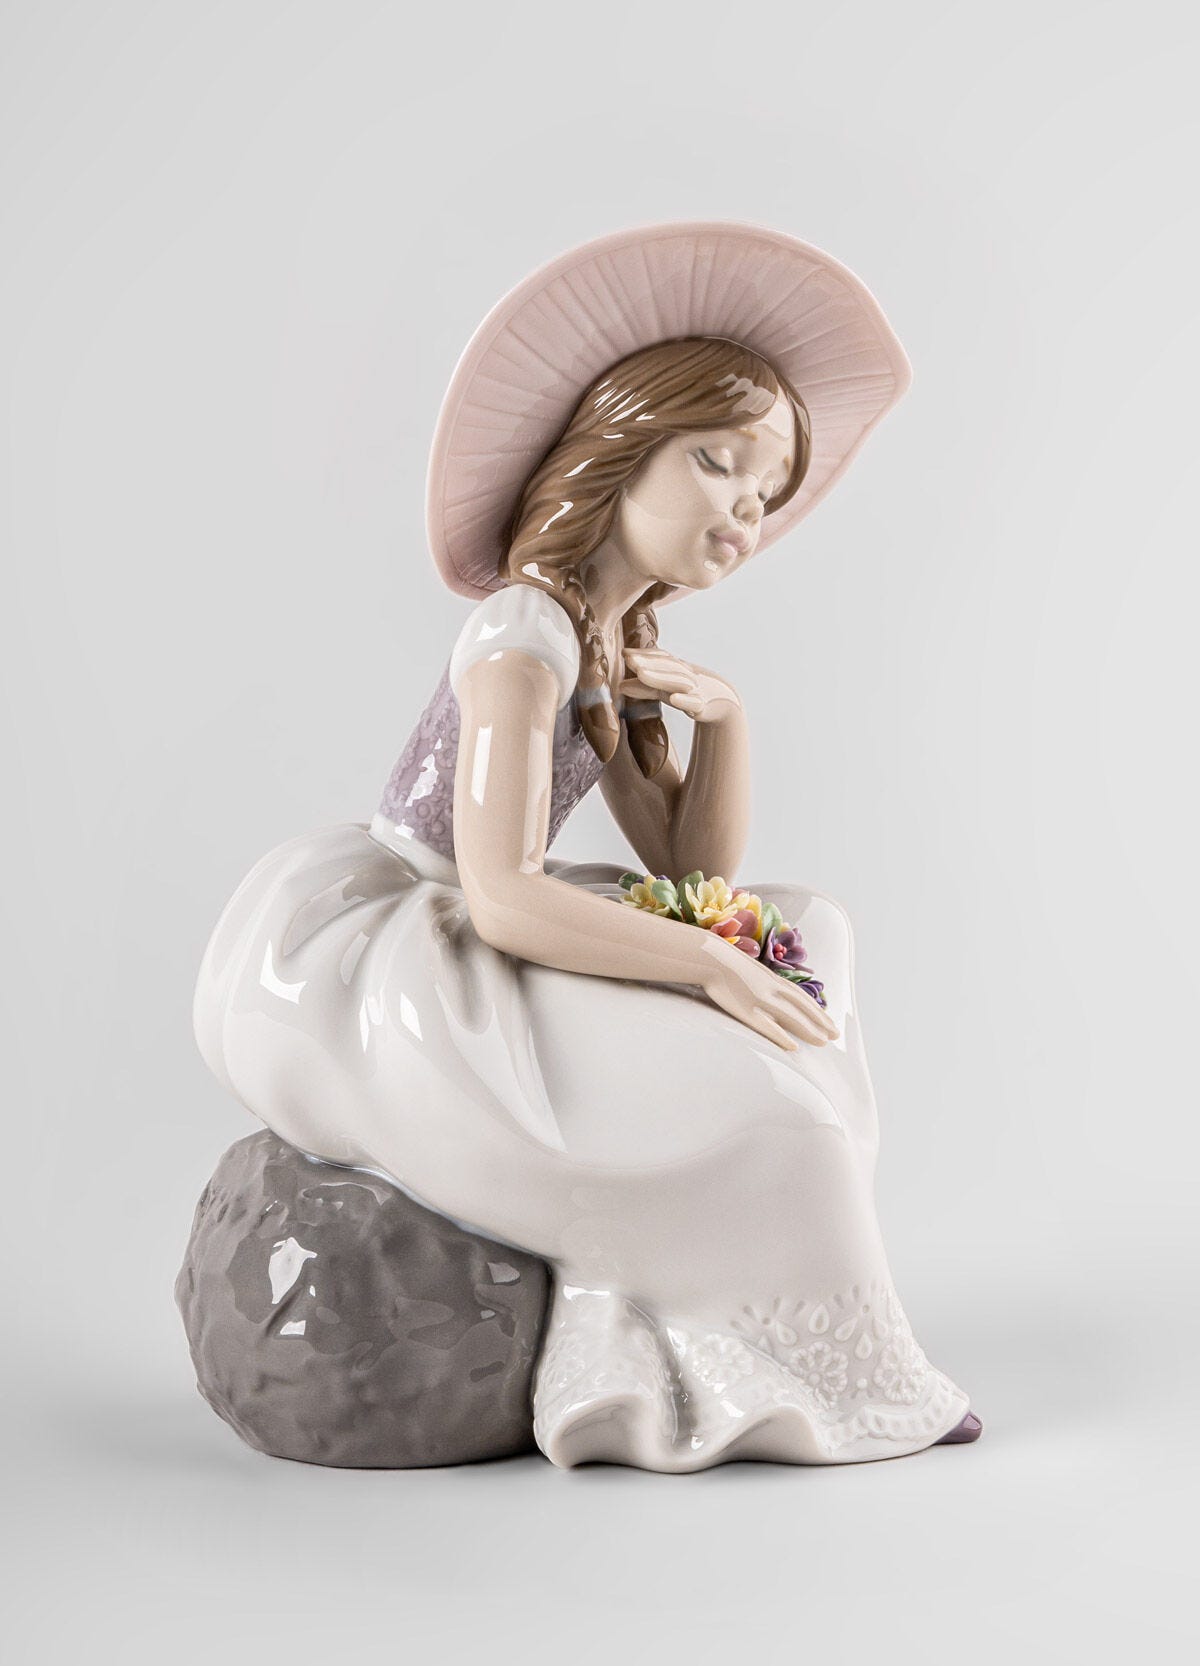 Spring Has Come Girl Figurine